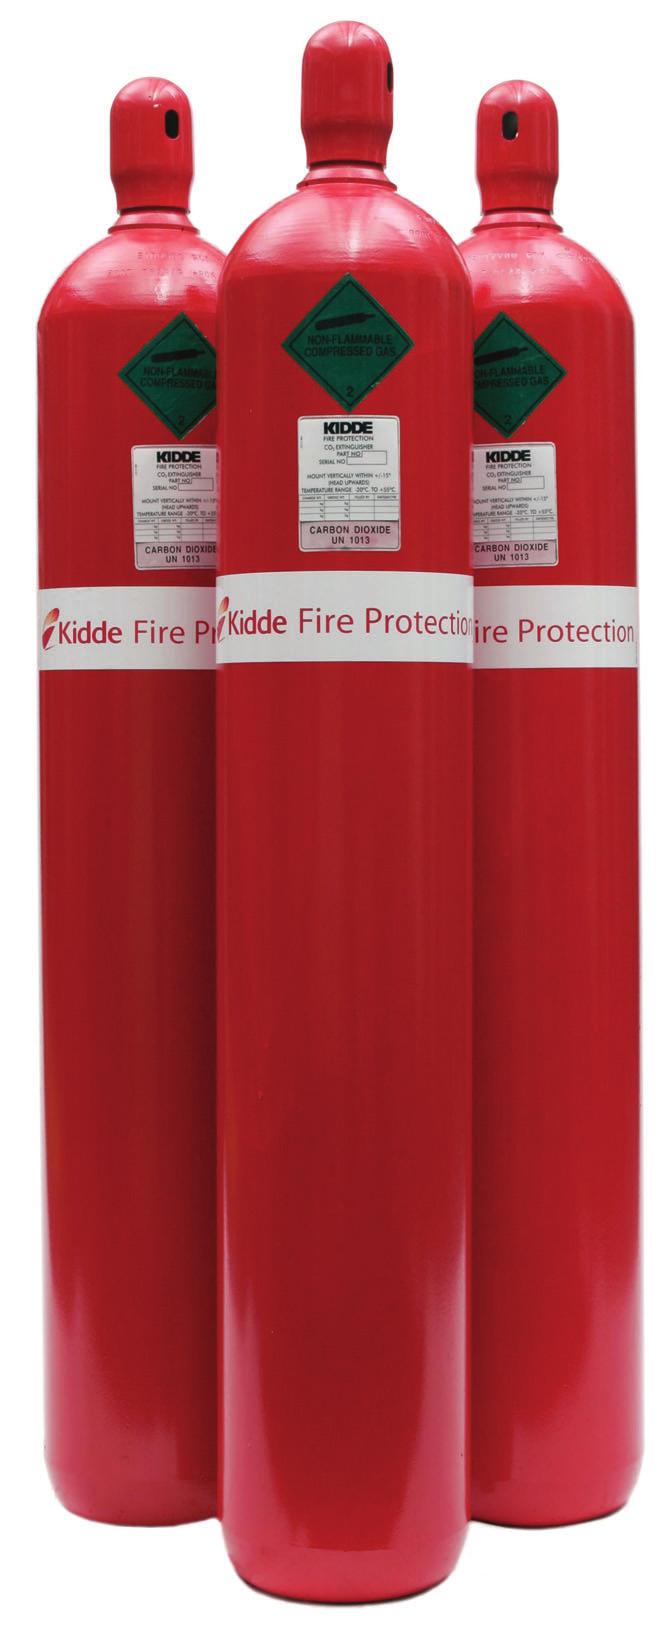 Kidde Fire Protection benefits from the accumulated experience of thousands of installations in power plants, industrial plants, oil refineries, electronic processes, on ships and in a wide variety